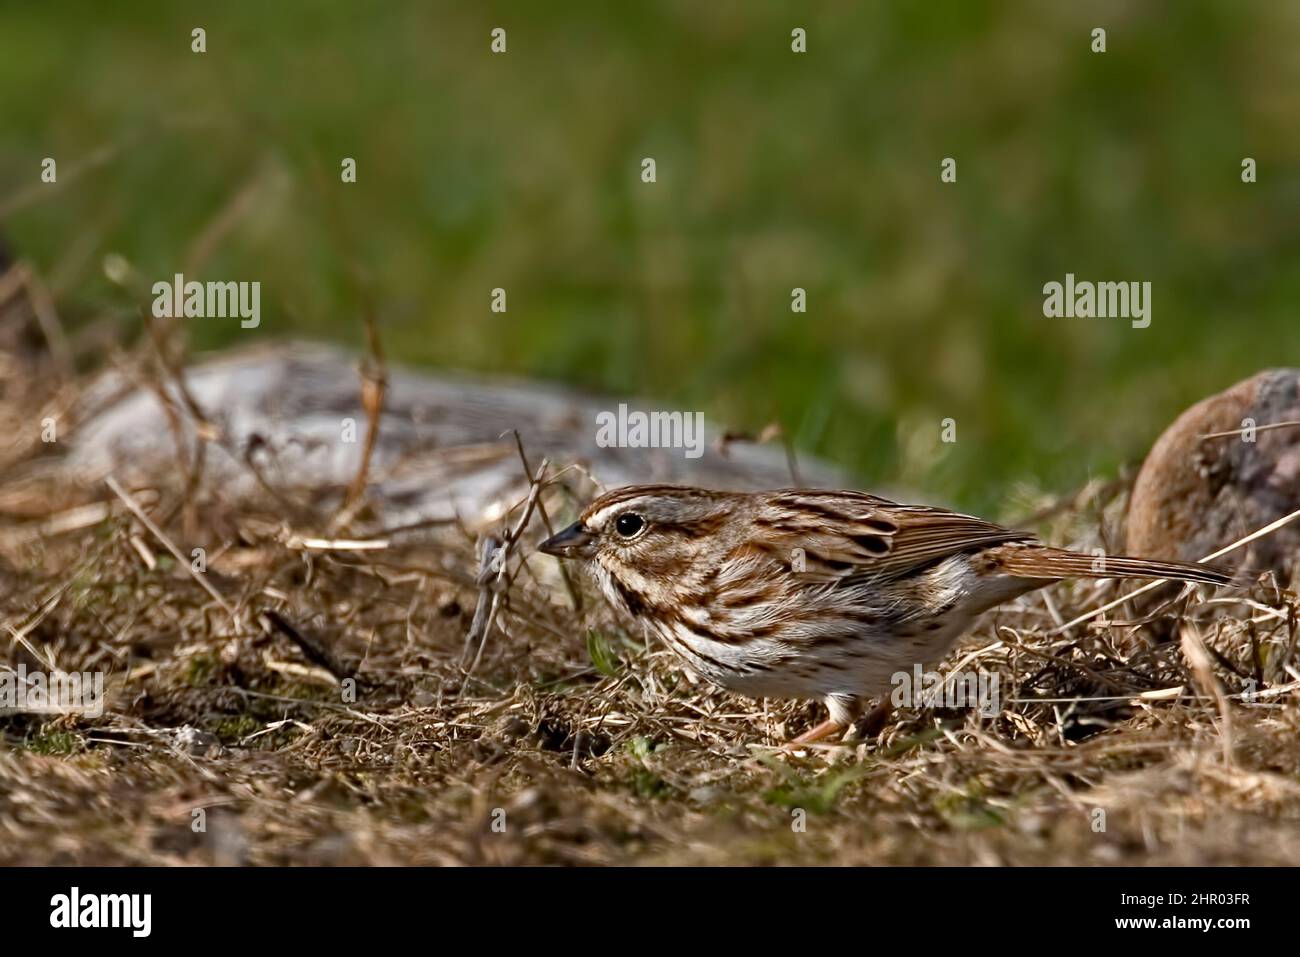 A Song Sparrow, Melospiza melodia, relaxing on the ground Stock Photo